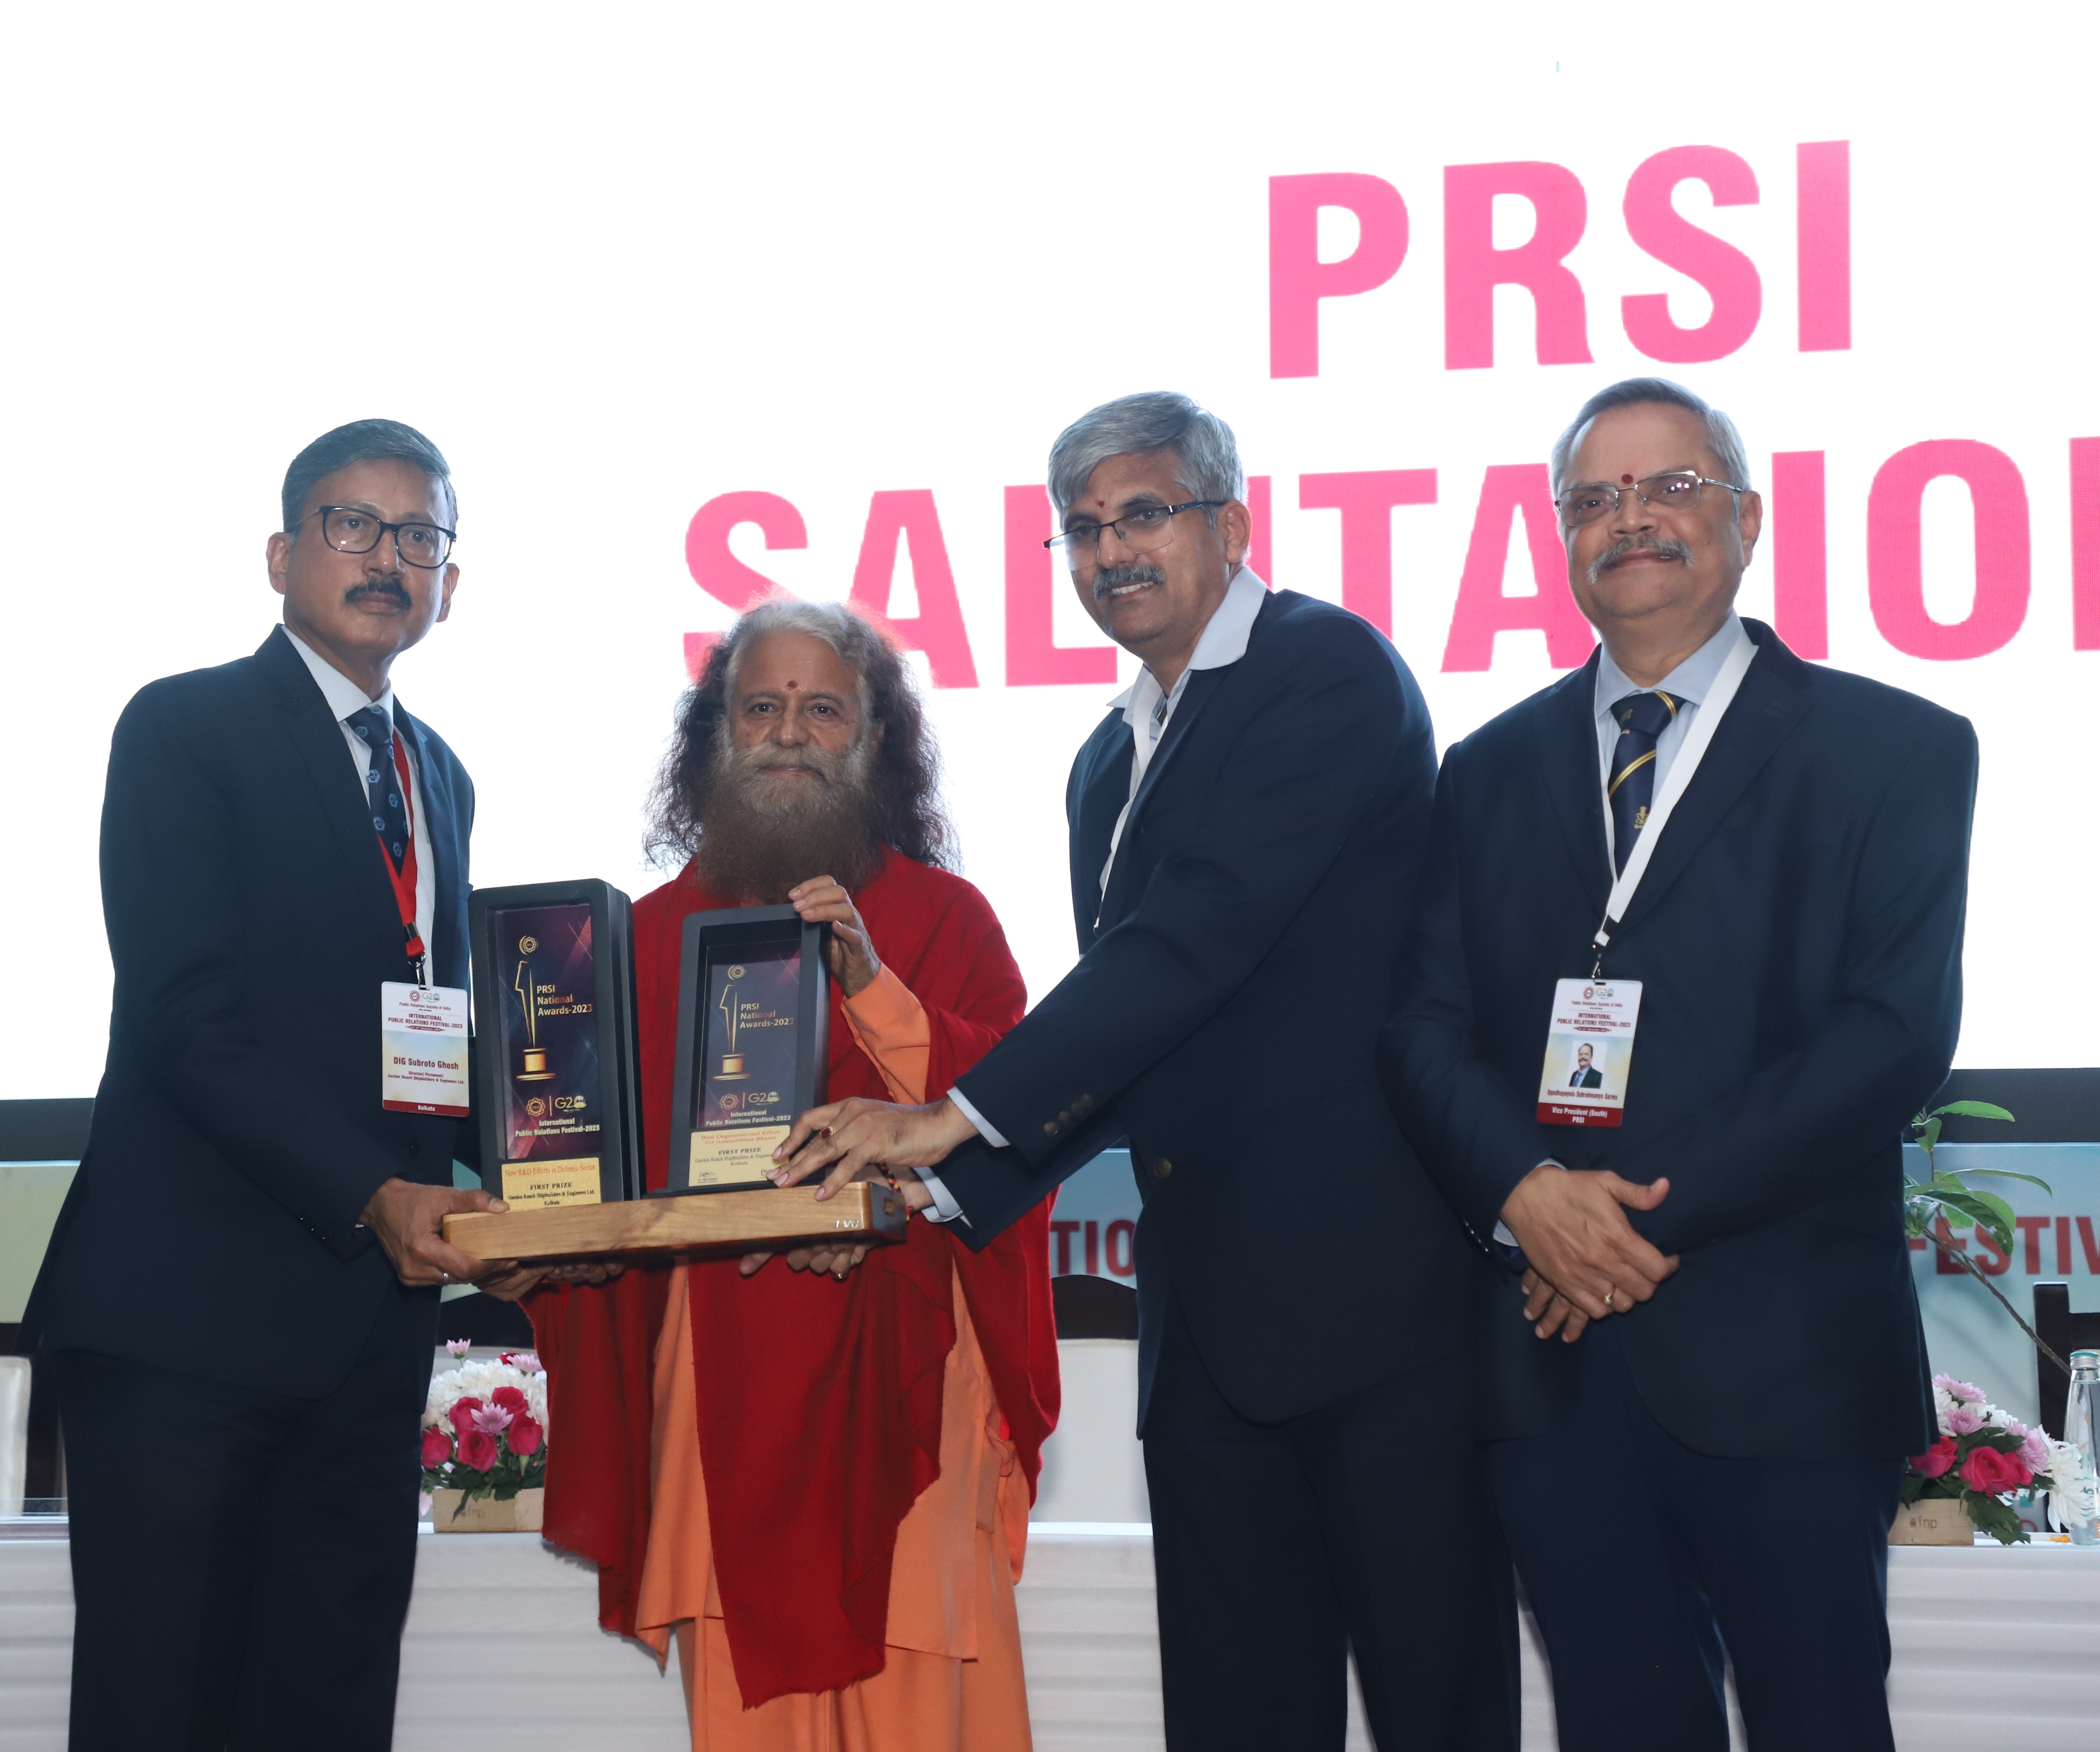 GRSE wins PRSI National Awards 23 in Five Categories - Best Coffee Table Book, Best PSU for CSR, Childcare Project, Best Organisation Effort in Atmanirbhar Bharat & New R&D Efforts on 25 Nov 23 - Thumbnail